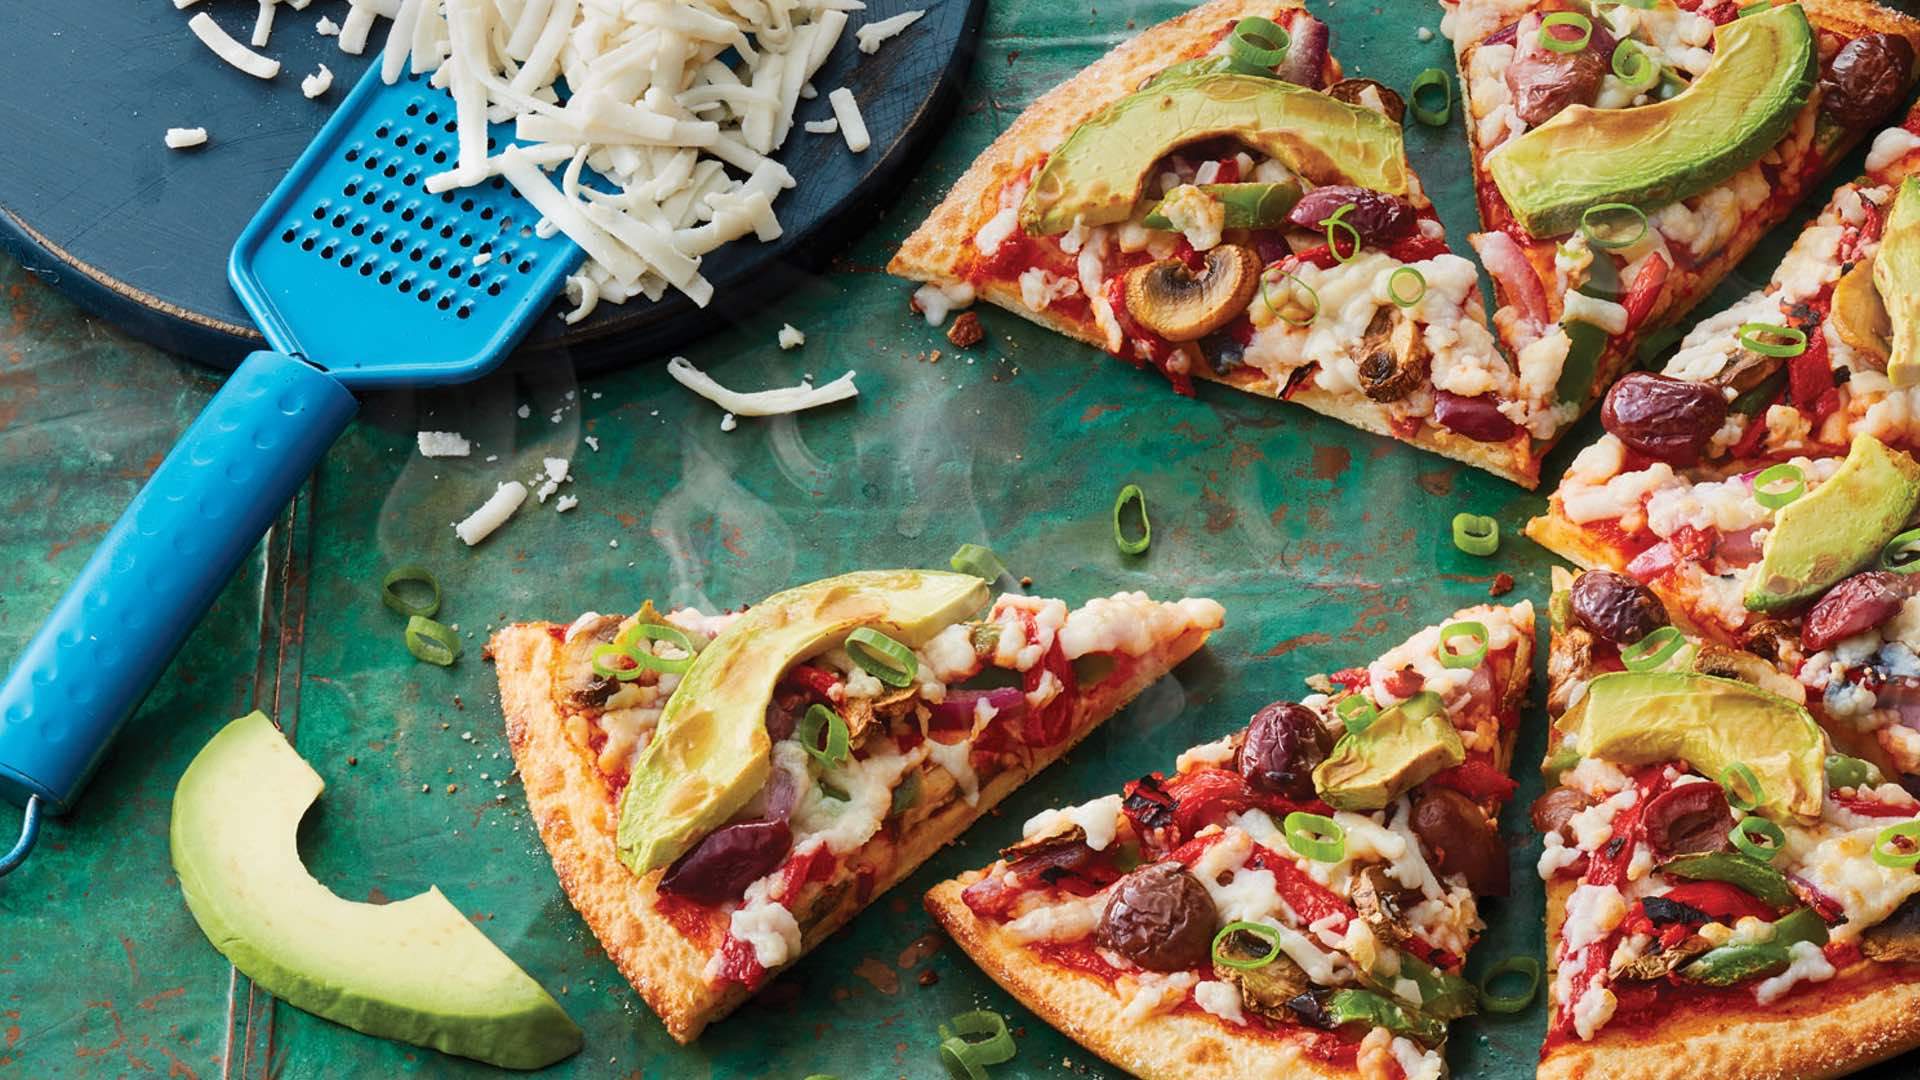 Domino's Taps Into the Vegan Cheap PizzaLover Market by